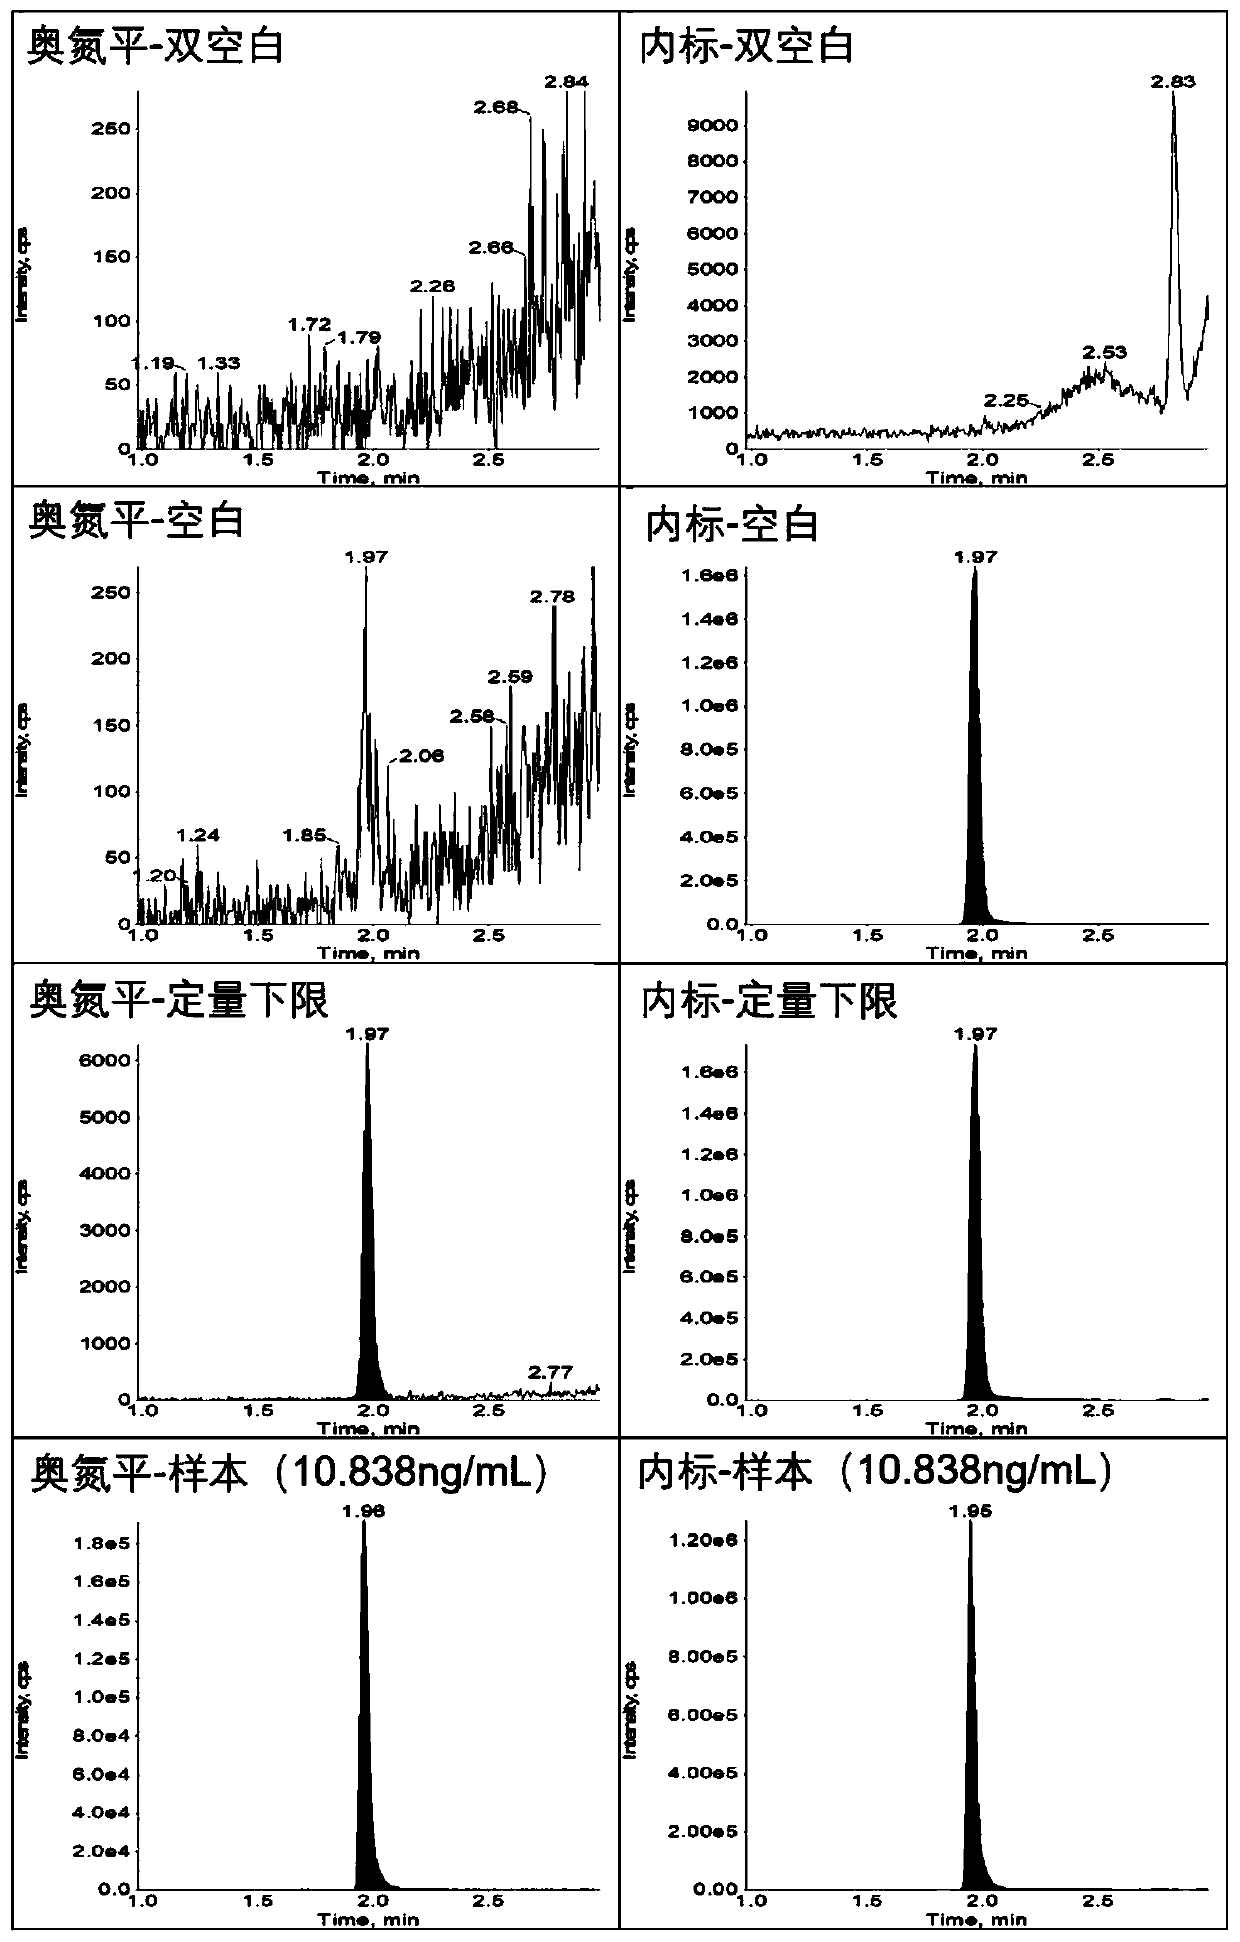 Method for determining concentration of olanzapine in blood plasma through high-performance liquid chromatography-tandem mass spectrometry